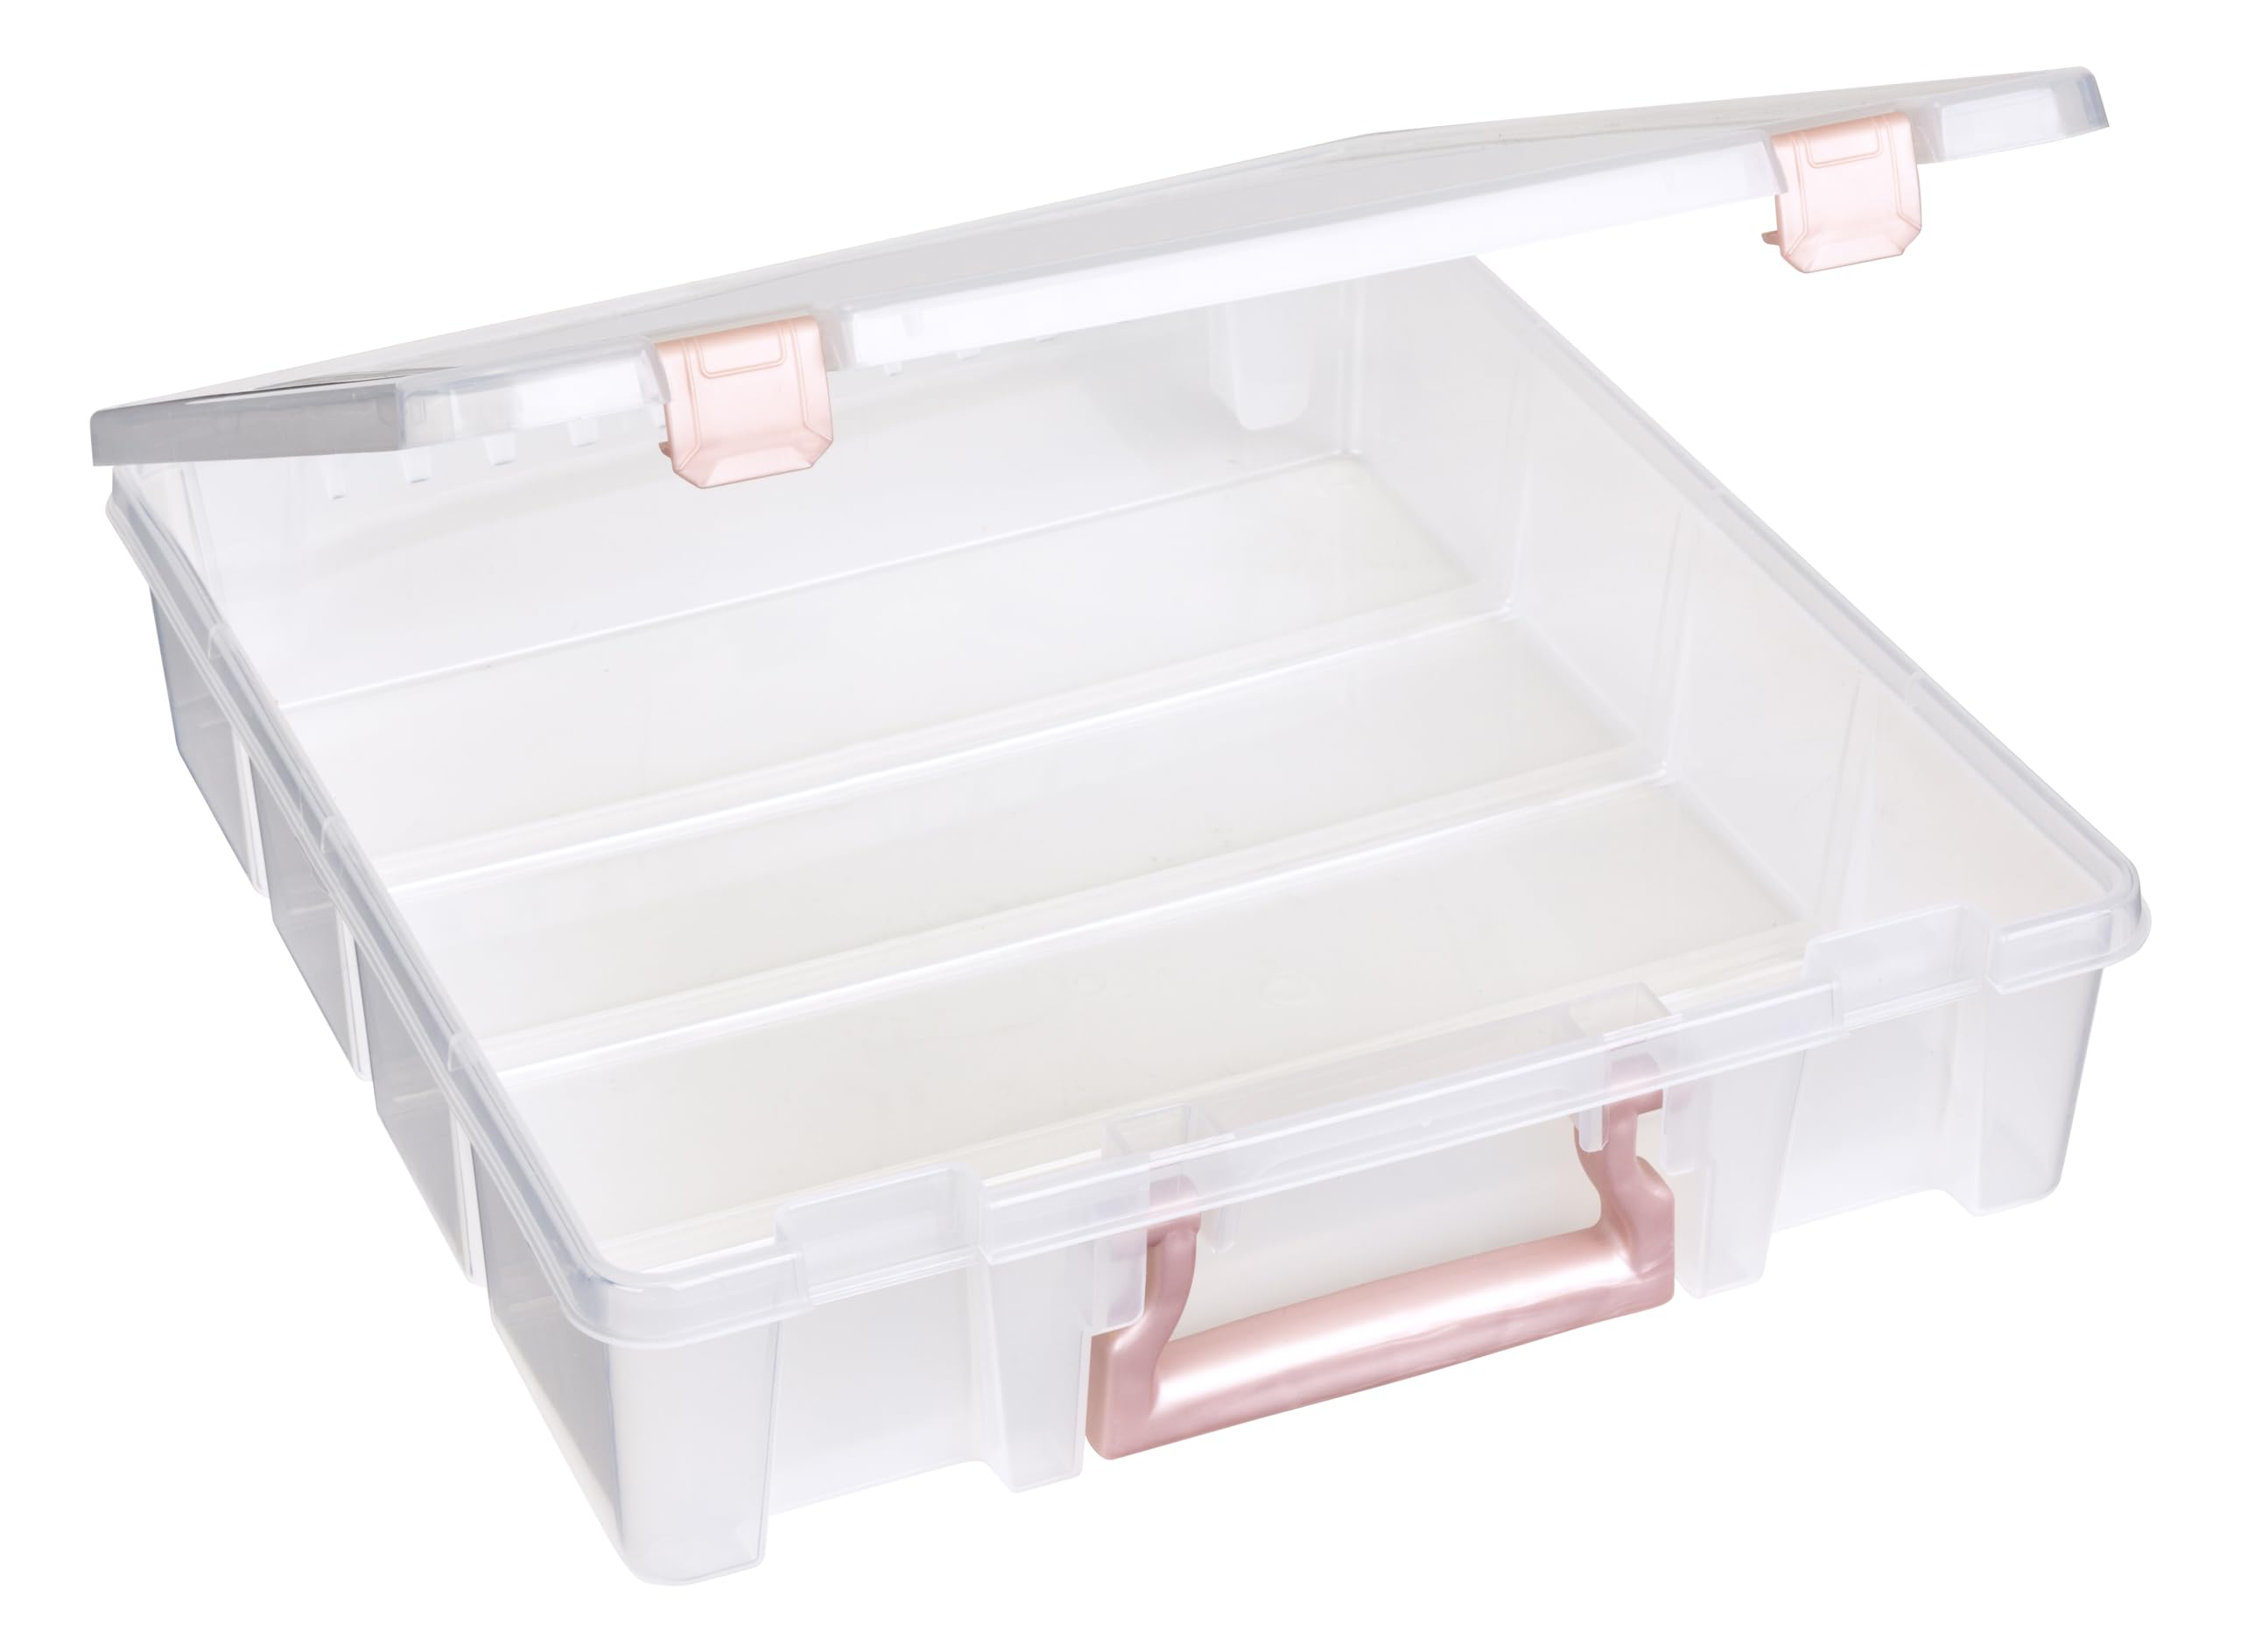 ArtBin Super Satchel with Rose Gold Accents Storage Container